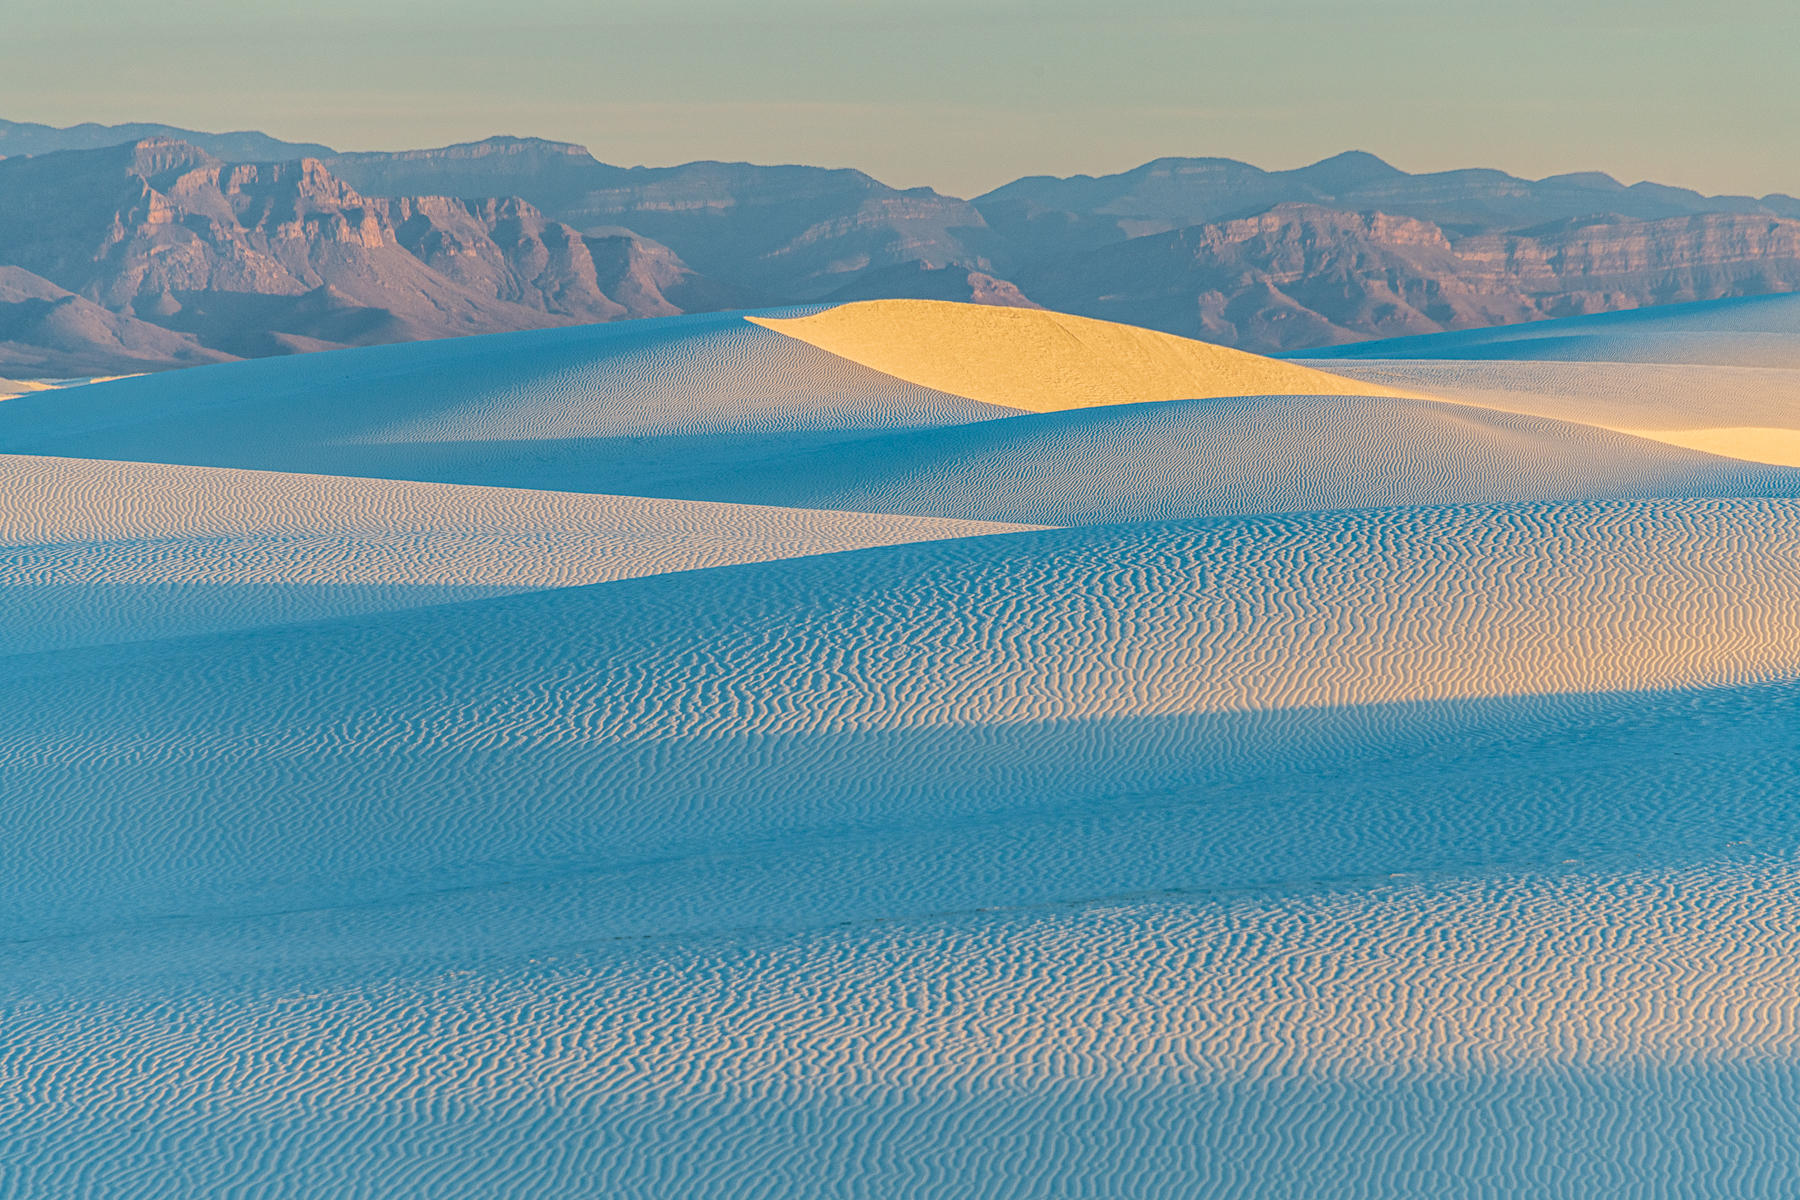 Gold Dome : White Sands, Glistening Sands of New Mexico : ELIZABETH SANJUAN PHOTOGRAPHY